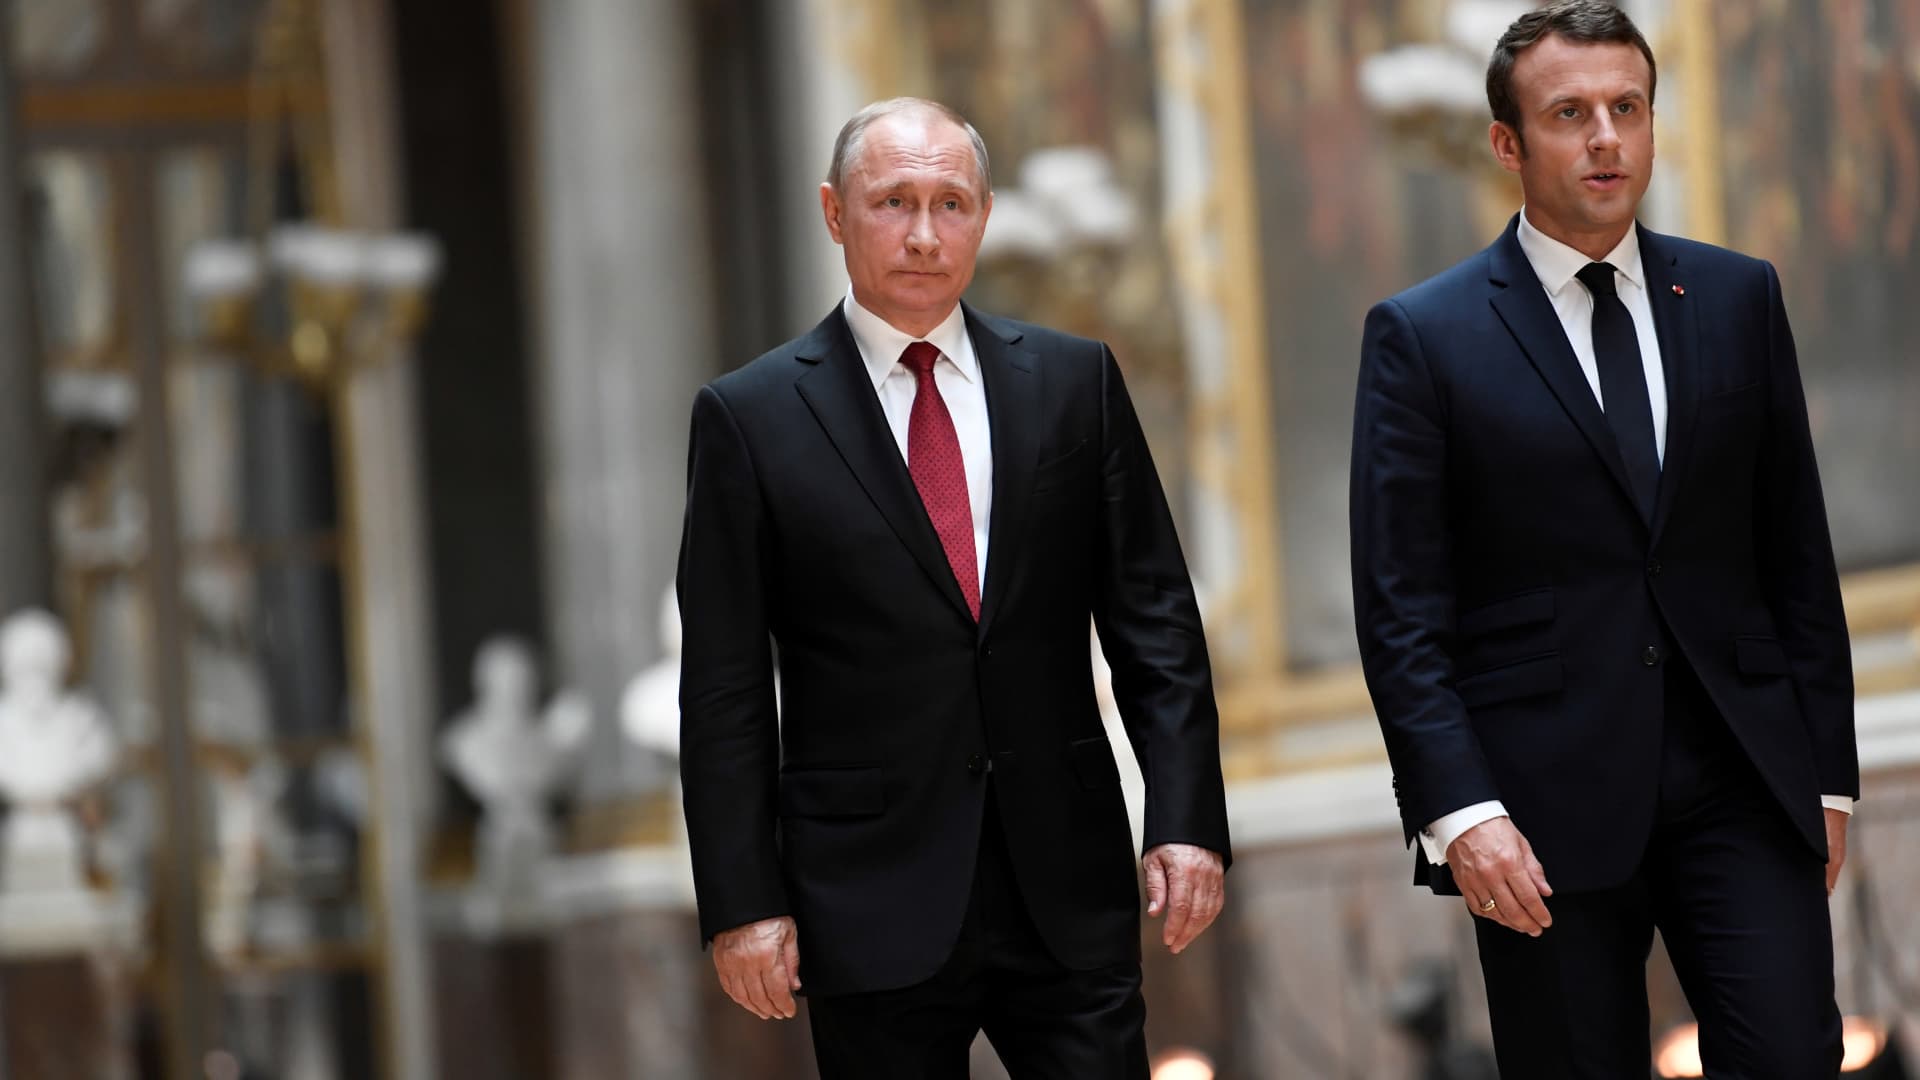 French President Emmanuel Macron, with Russian President Vladimir Putin, in Versailles on May 29, 2017.